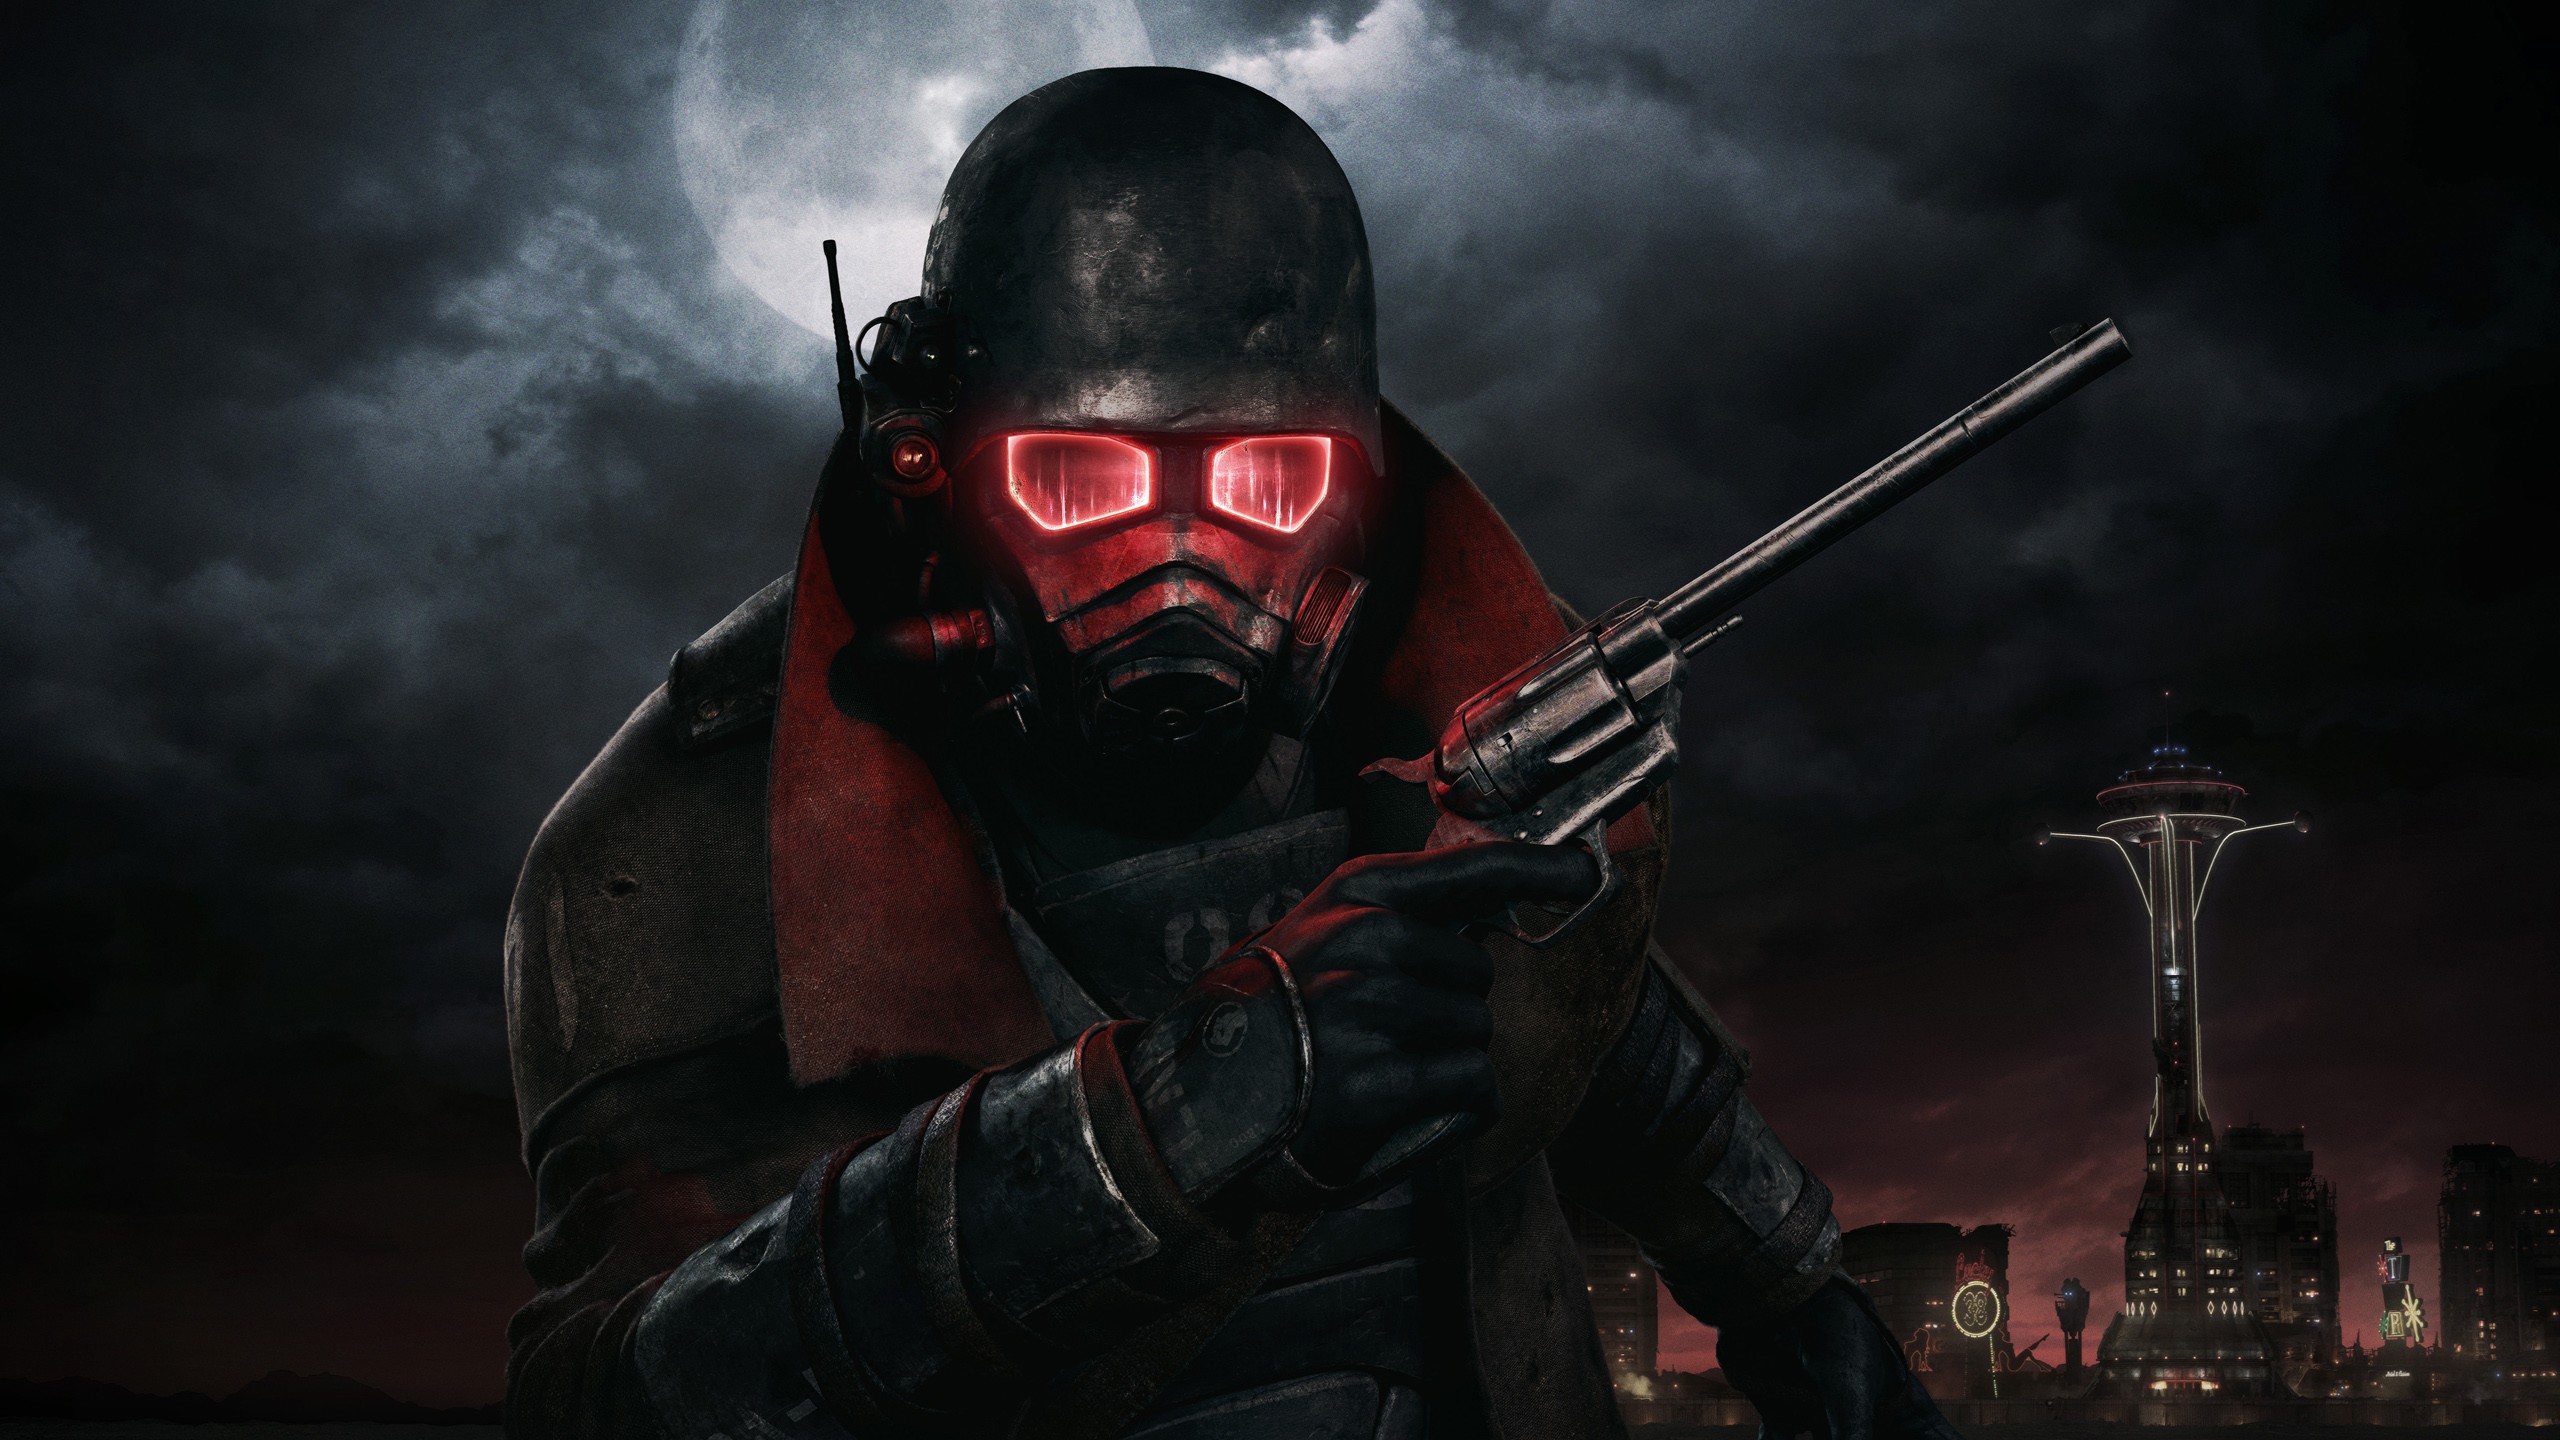 fallout new vegas wallpaper hd,action adventure game,personal protective equipment,pc game,shooter game,darkness